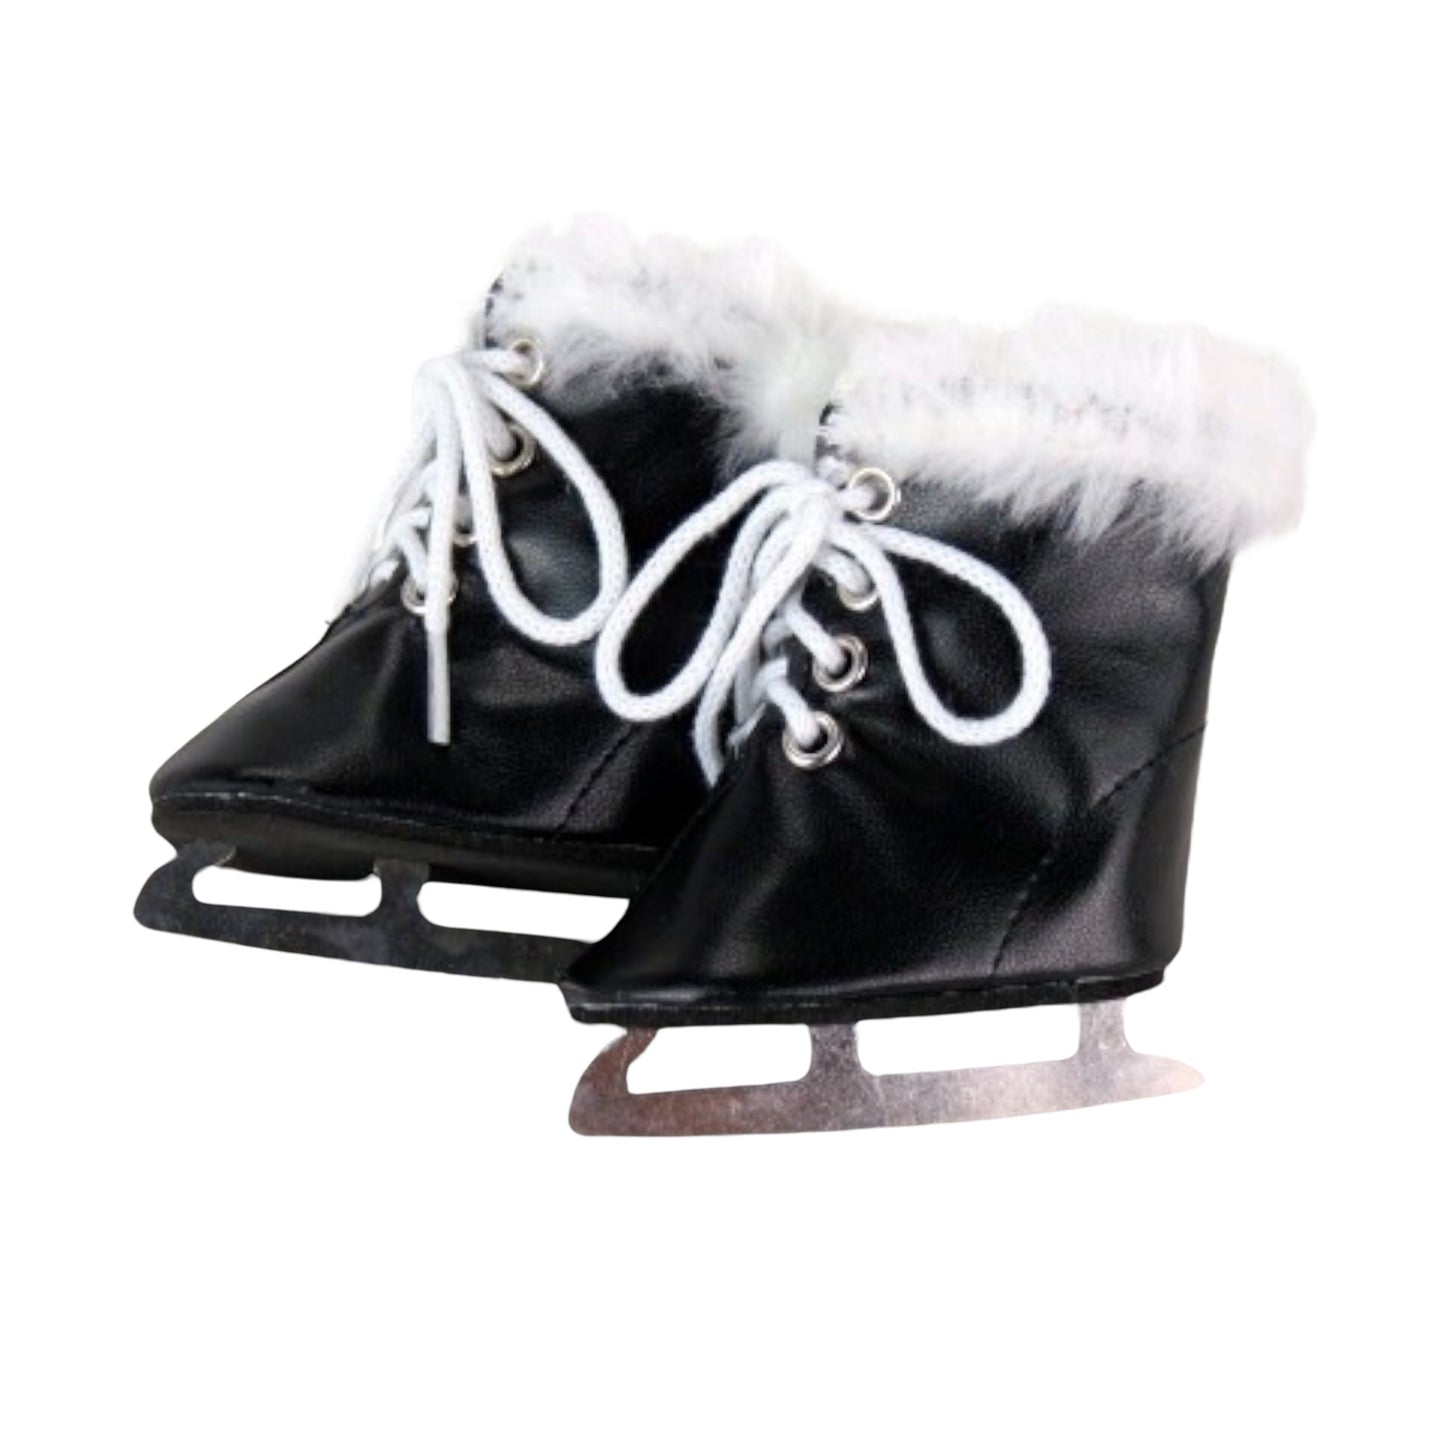 Black Ice Skates for 18-inch dolls Side view